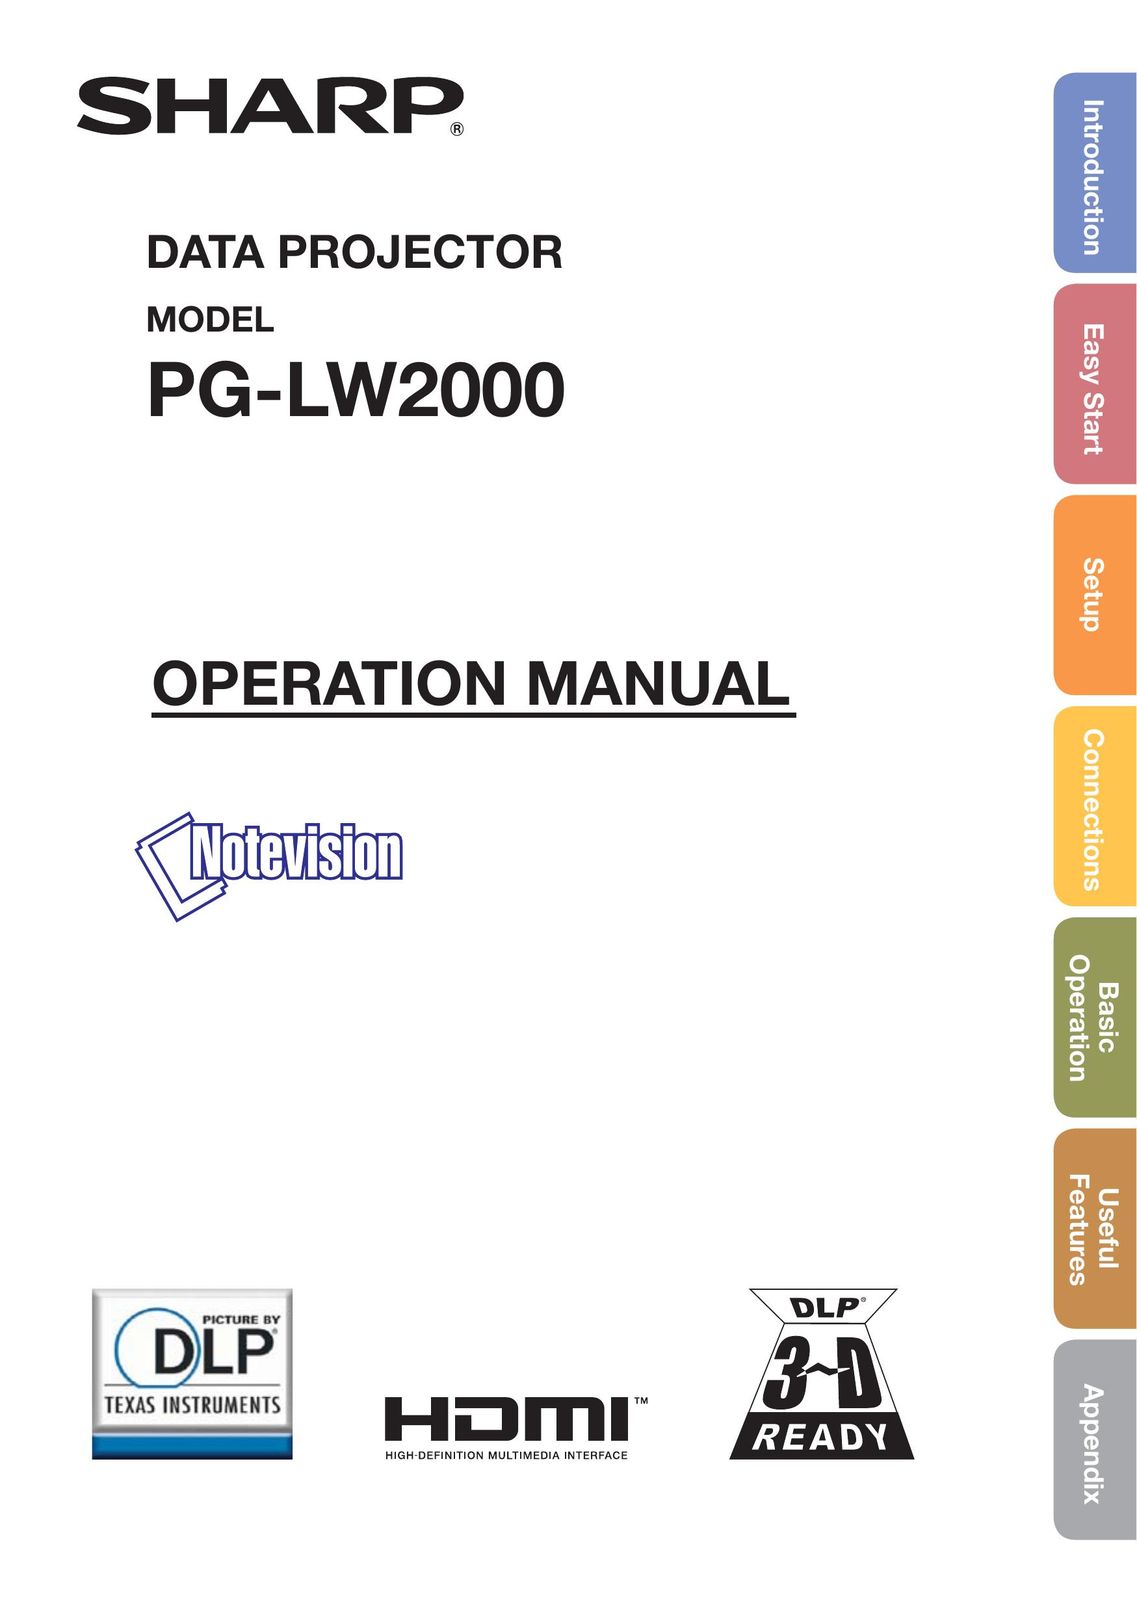 Sharp PGLW2000 Projection Television User Manual